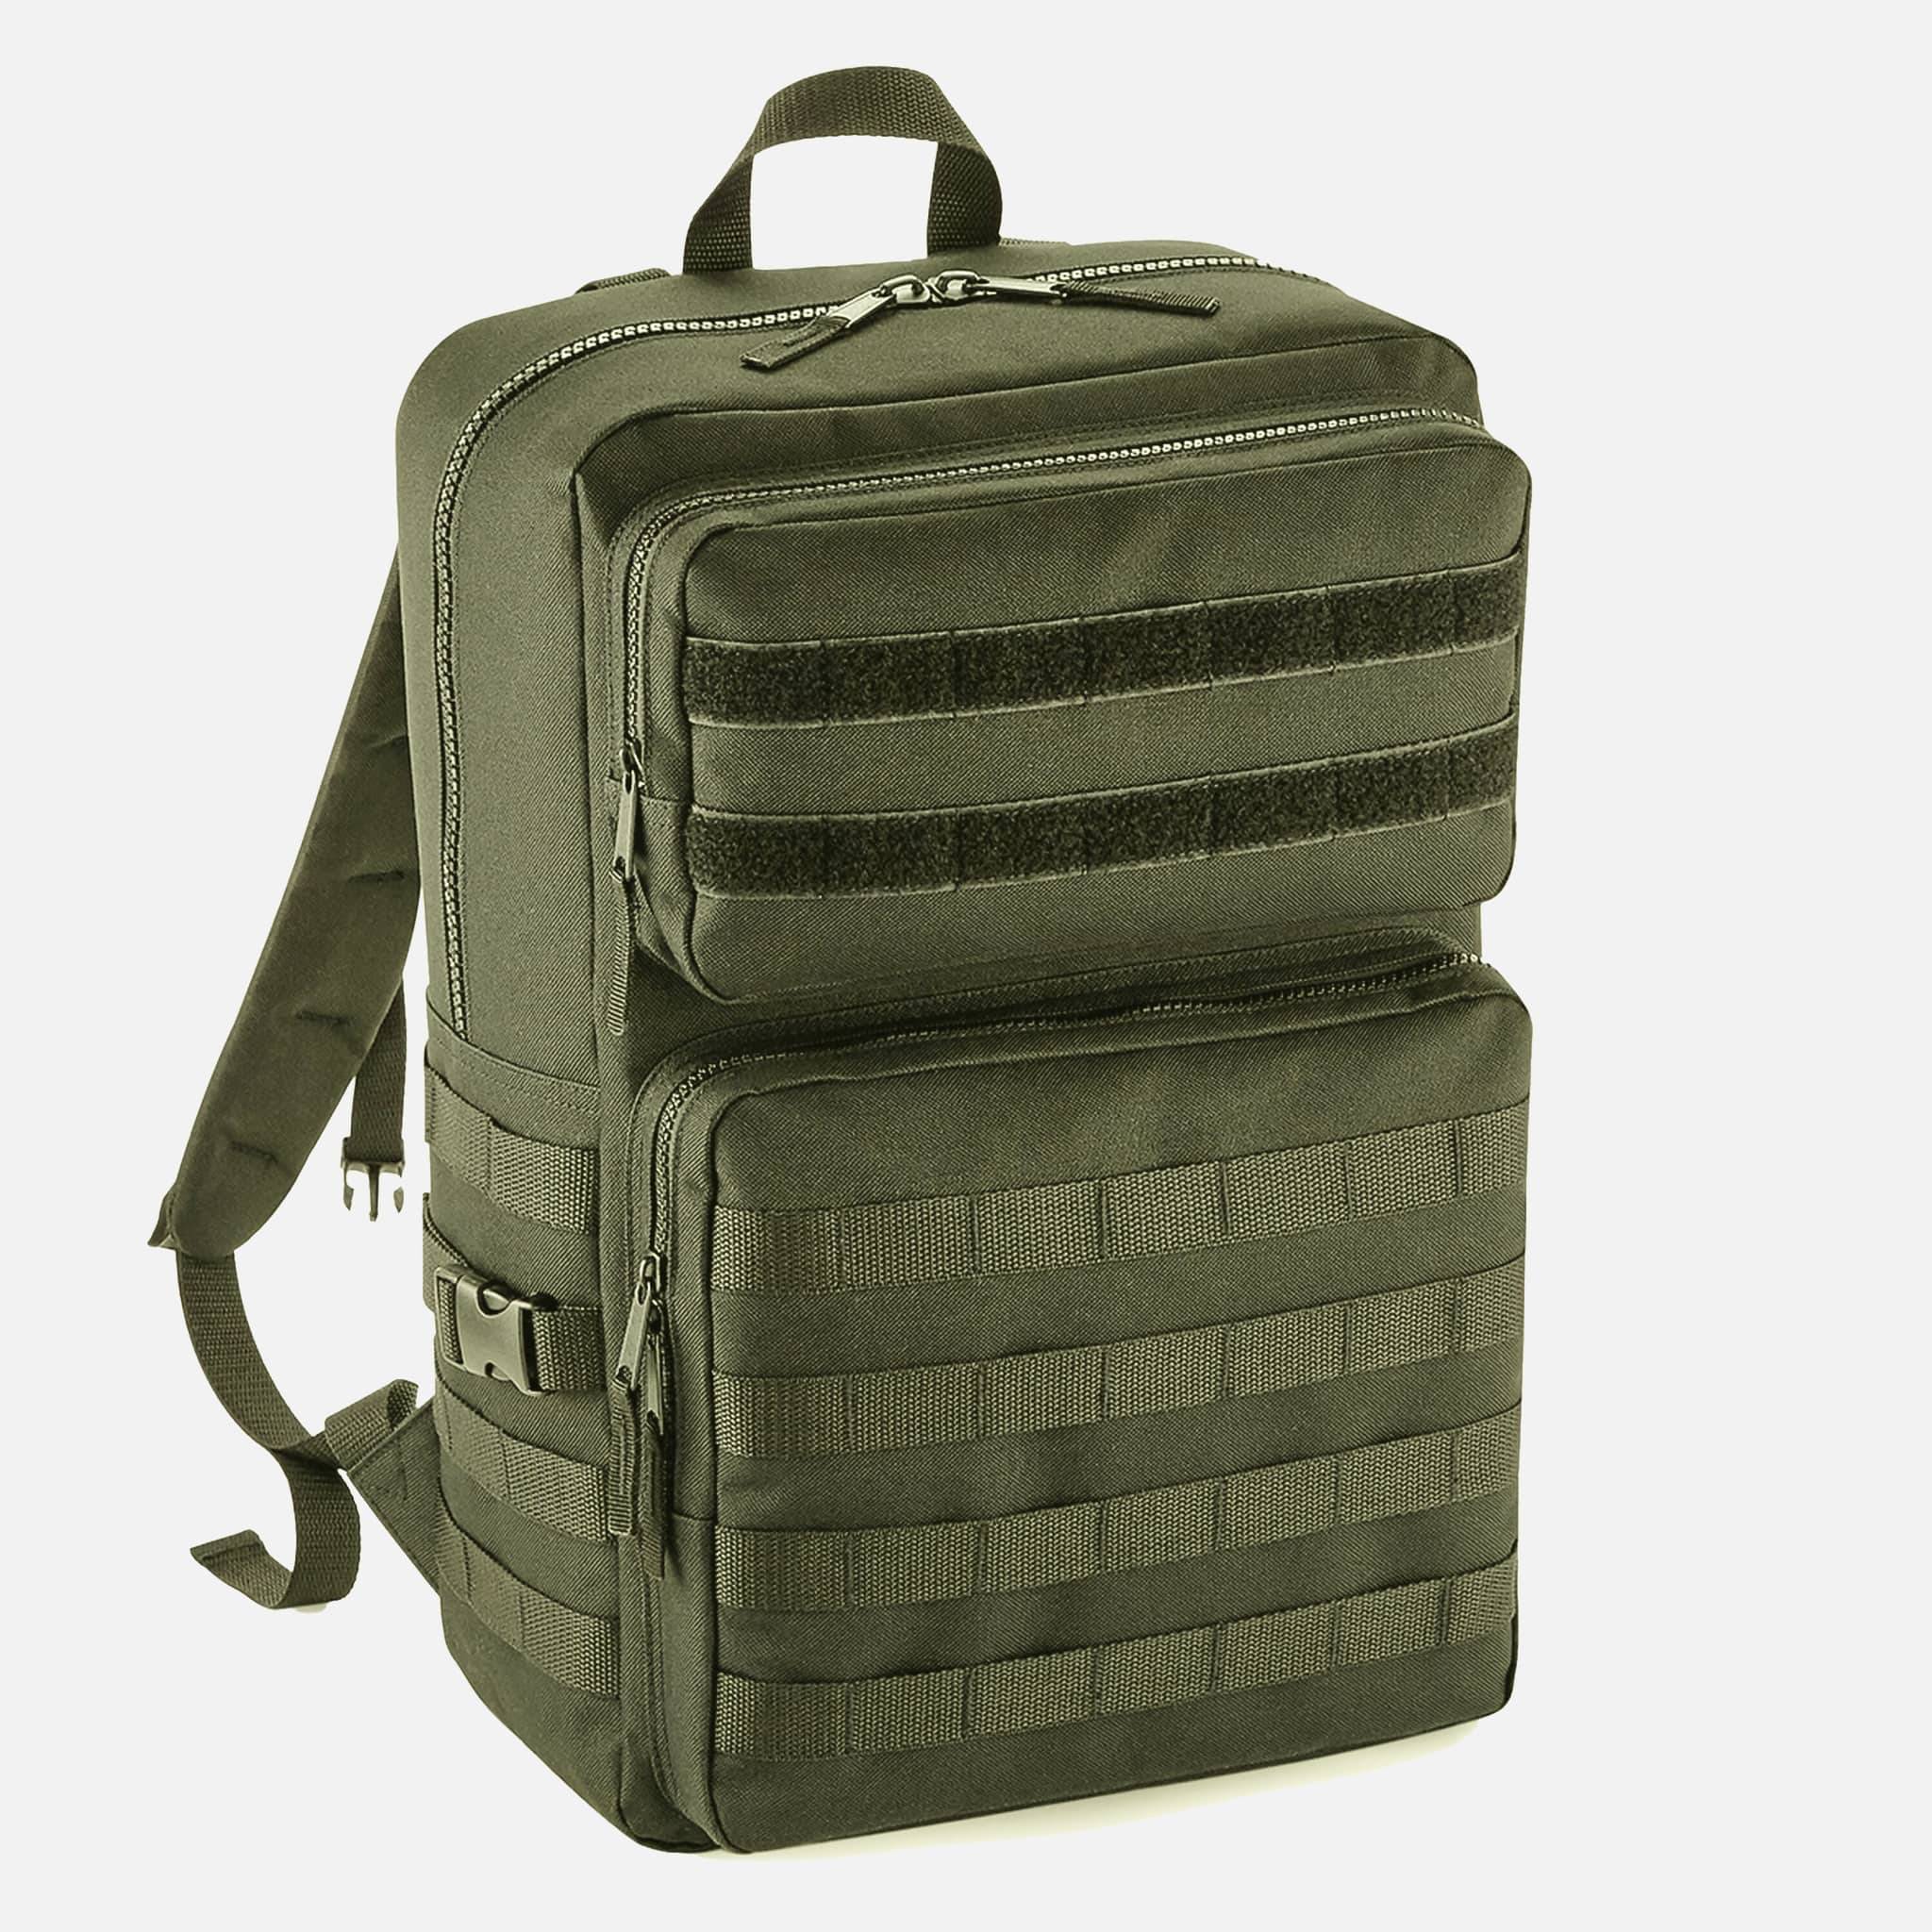 The Tactical Bag in military green with hook and loop areas and MOLLE system on the back